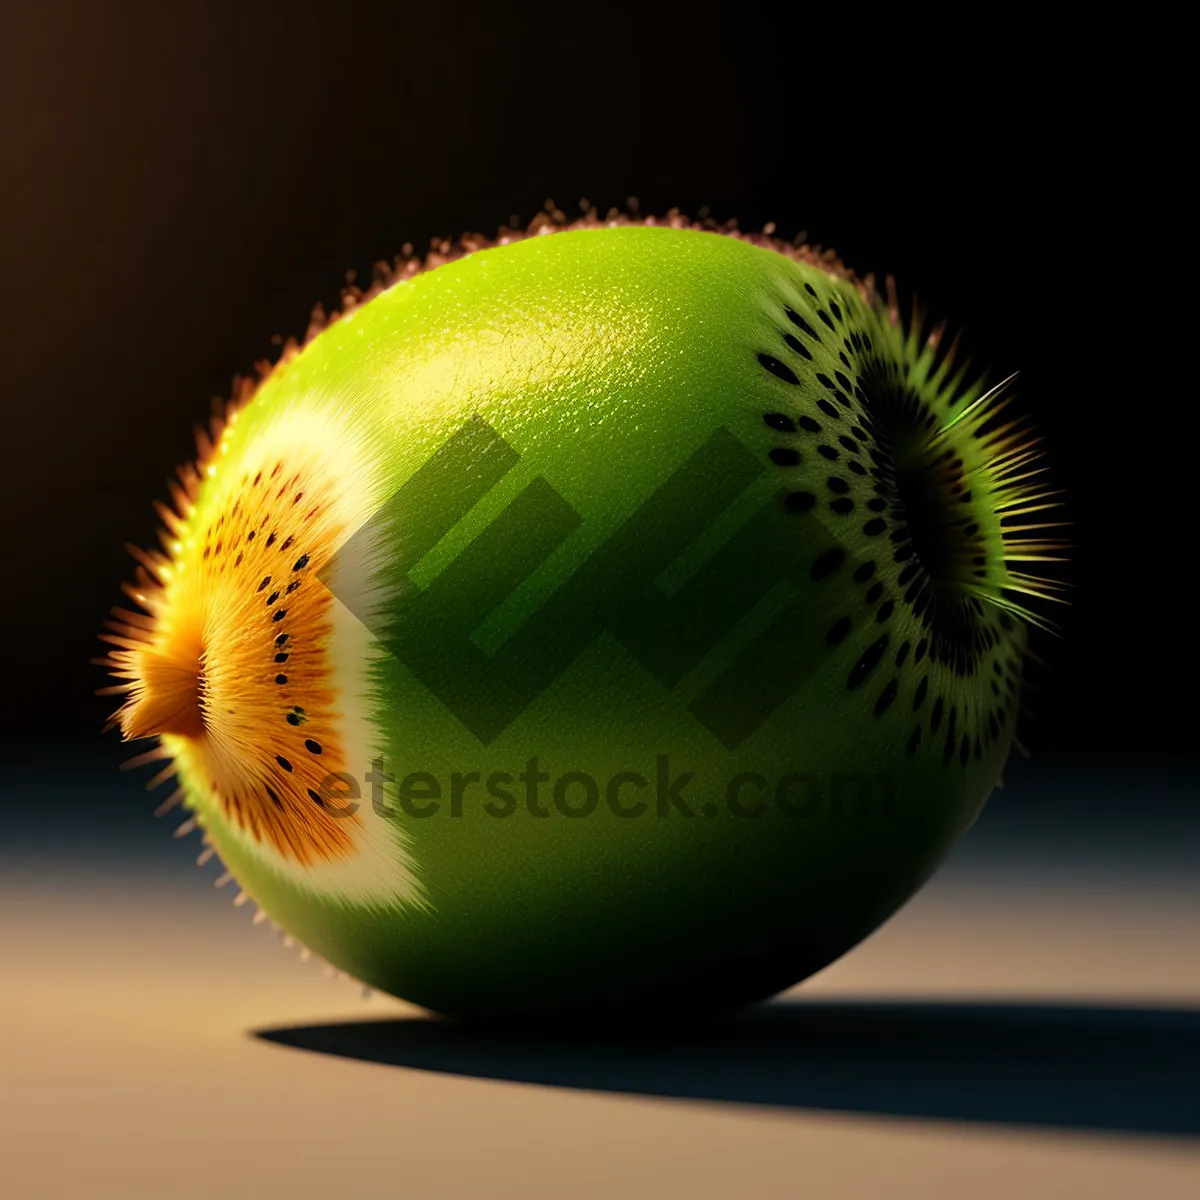 Picture of Juicy Kiwi Delight: Fresh and Healthy Slice